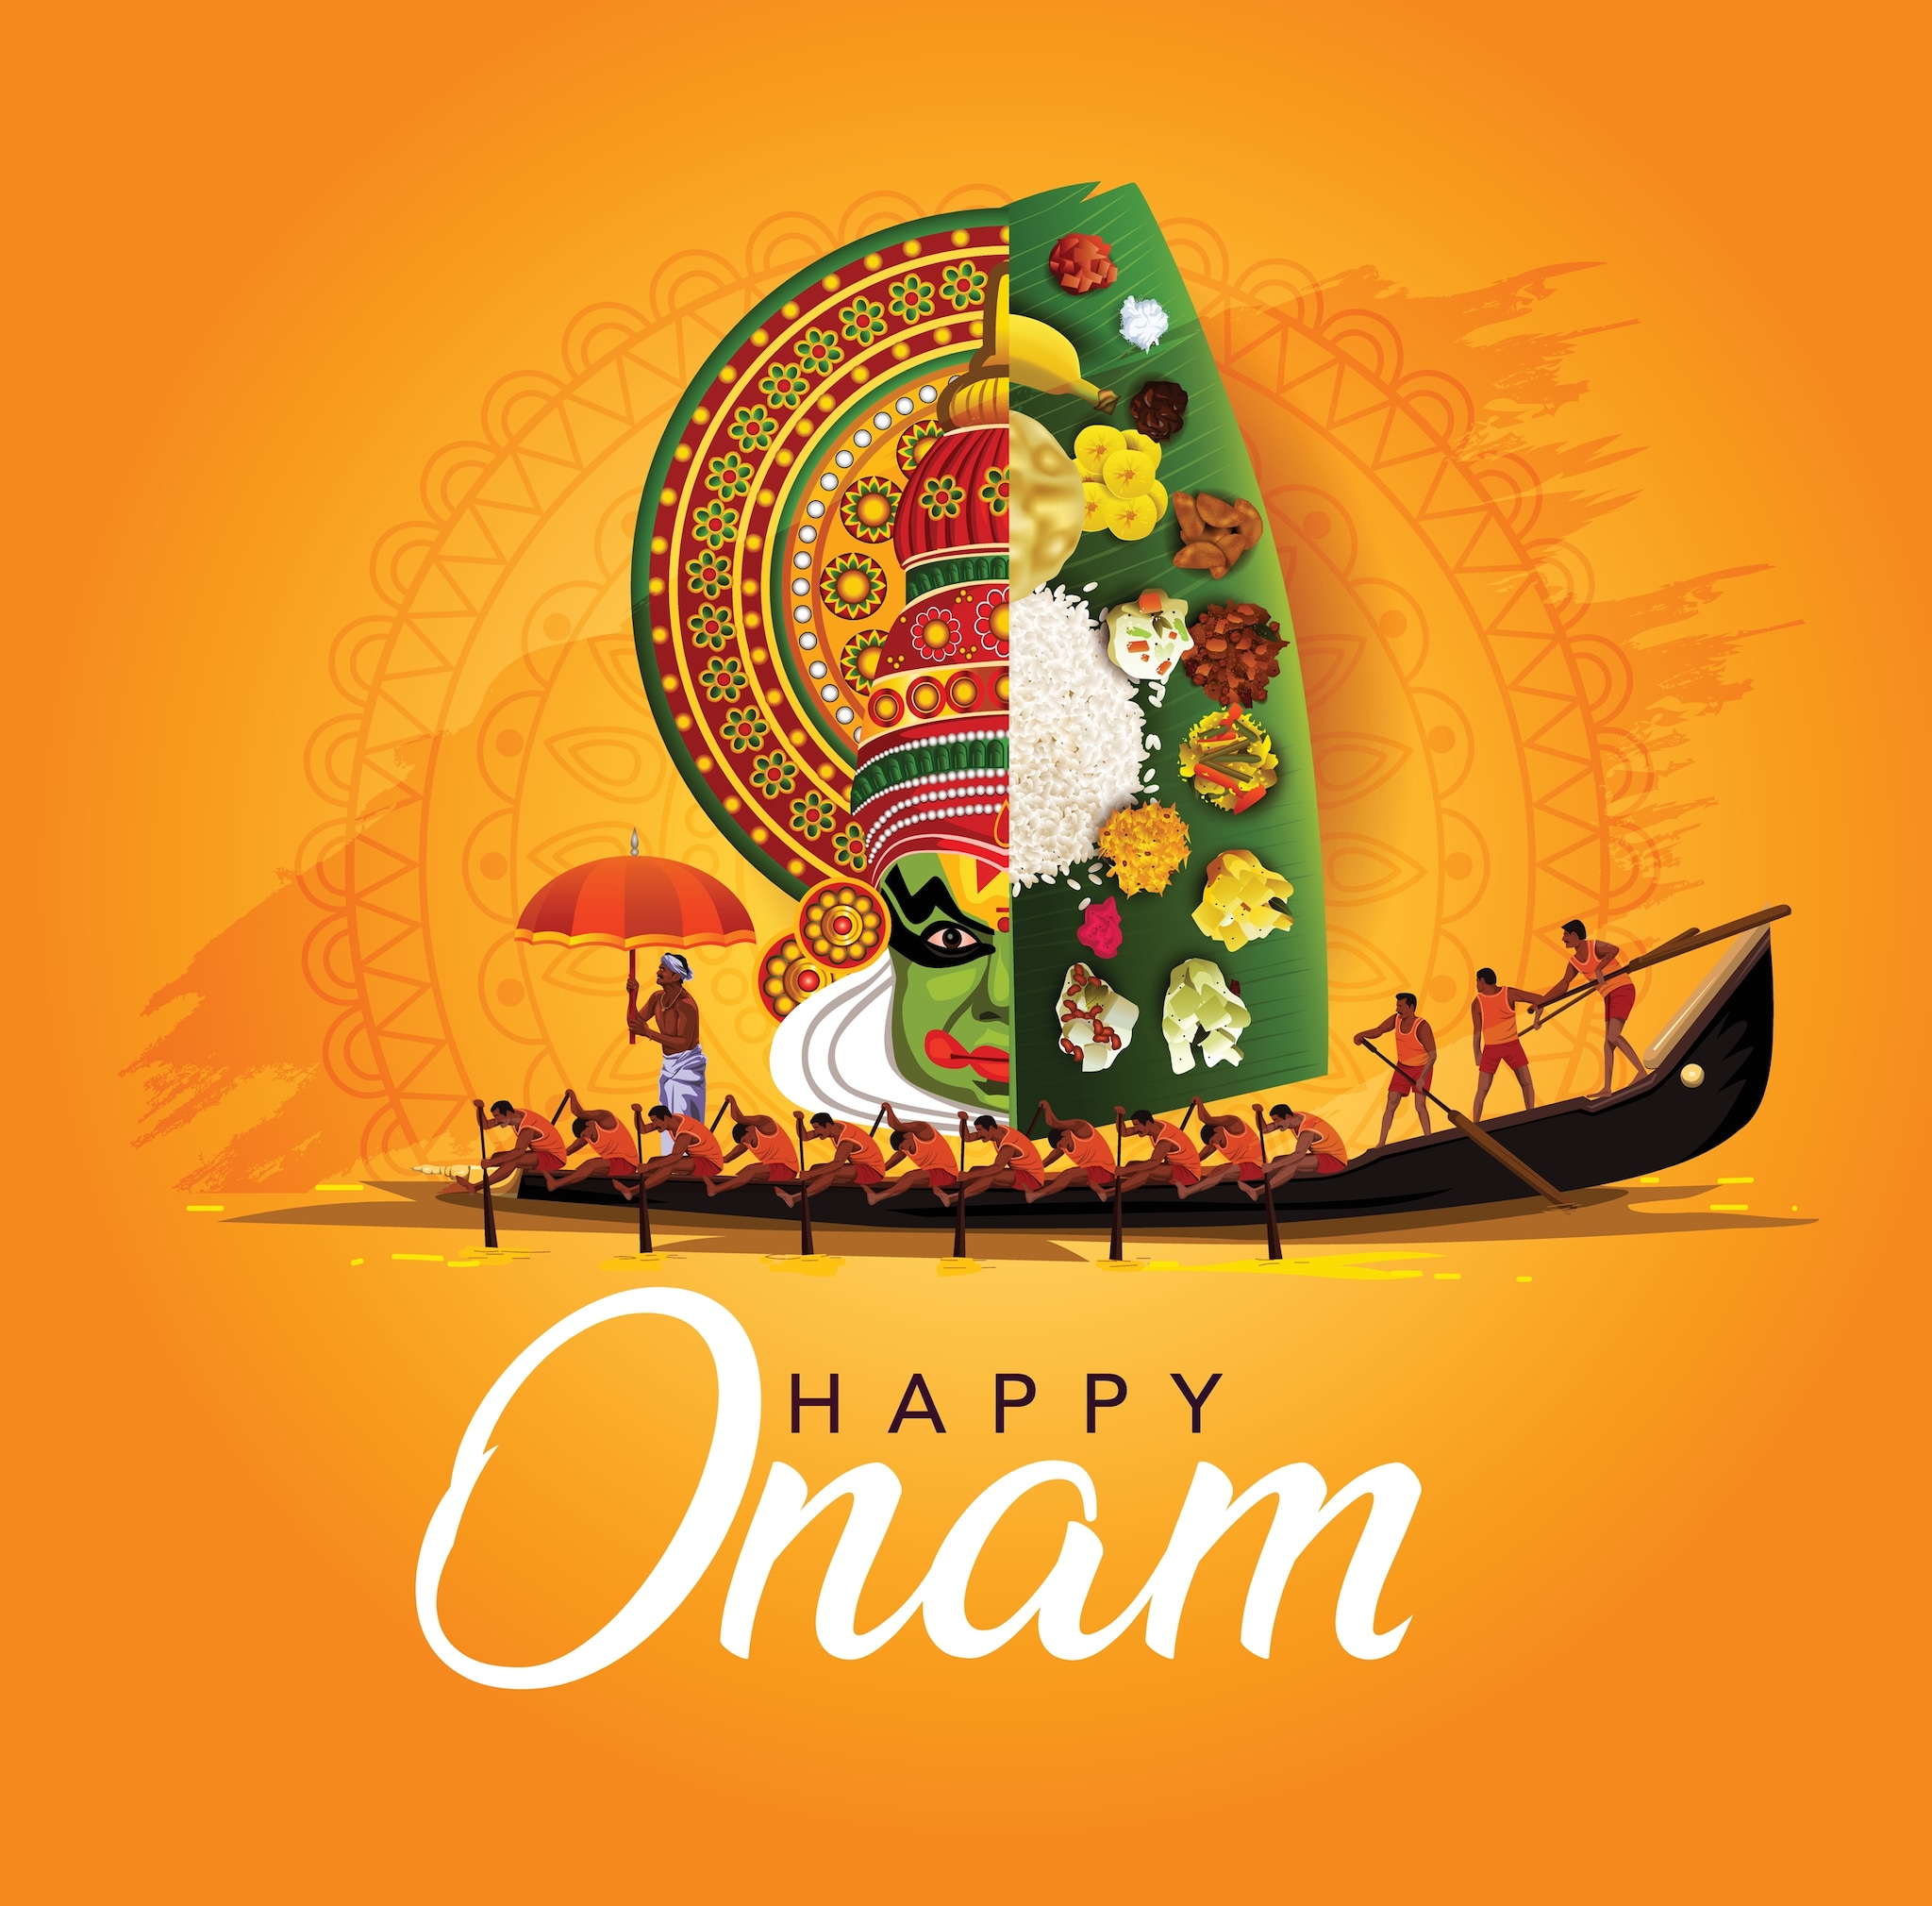 Happy Onam 2022 : Best wishes, messages, quotes, greetings, SMS, WhatsApp and Facebook status to share with your family and friends on Thiruvonam. (Image: Shutterstock) 